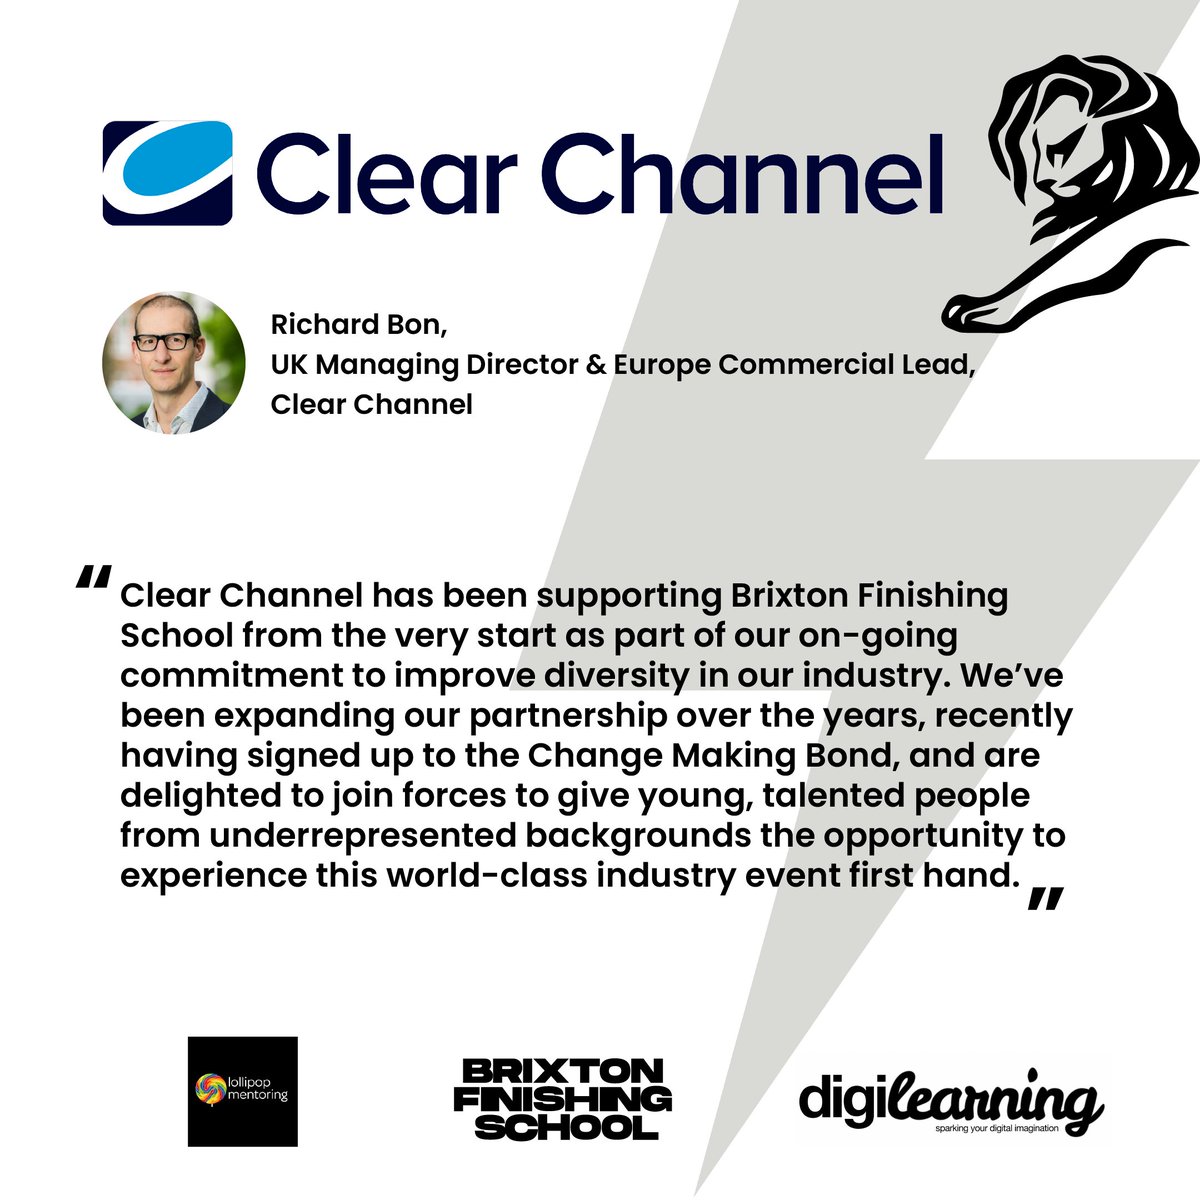 We're delighted @ClearChannelUK have donated to #CannesForAll, an initiative led by @BrixtonFSchool, @digilearningHQ and #LollipopMentoring. 

#CannesLions #CannesForAll #ChangeMakers